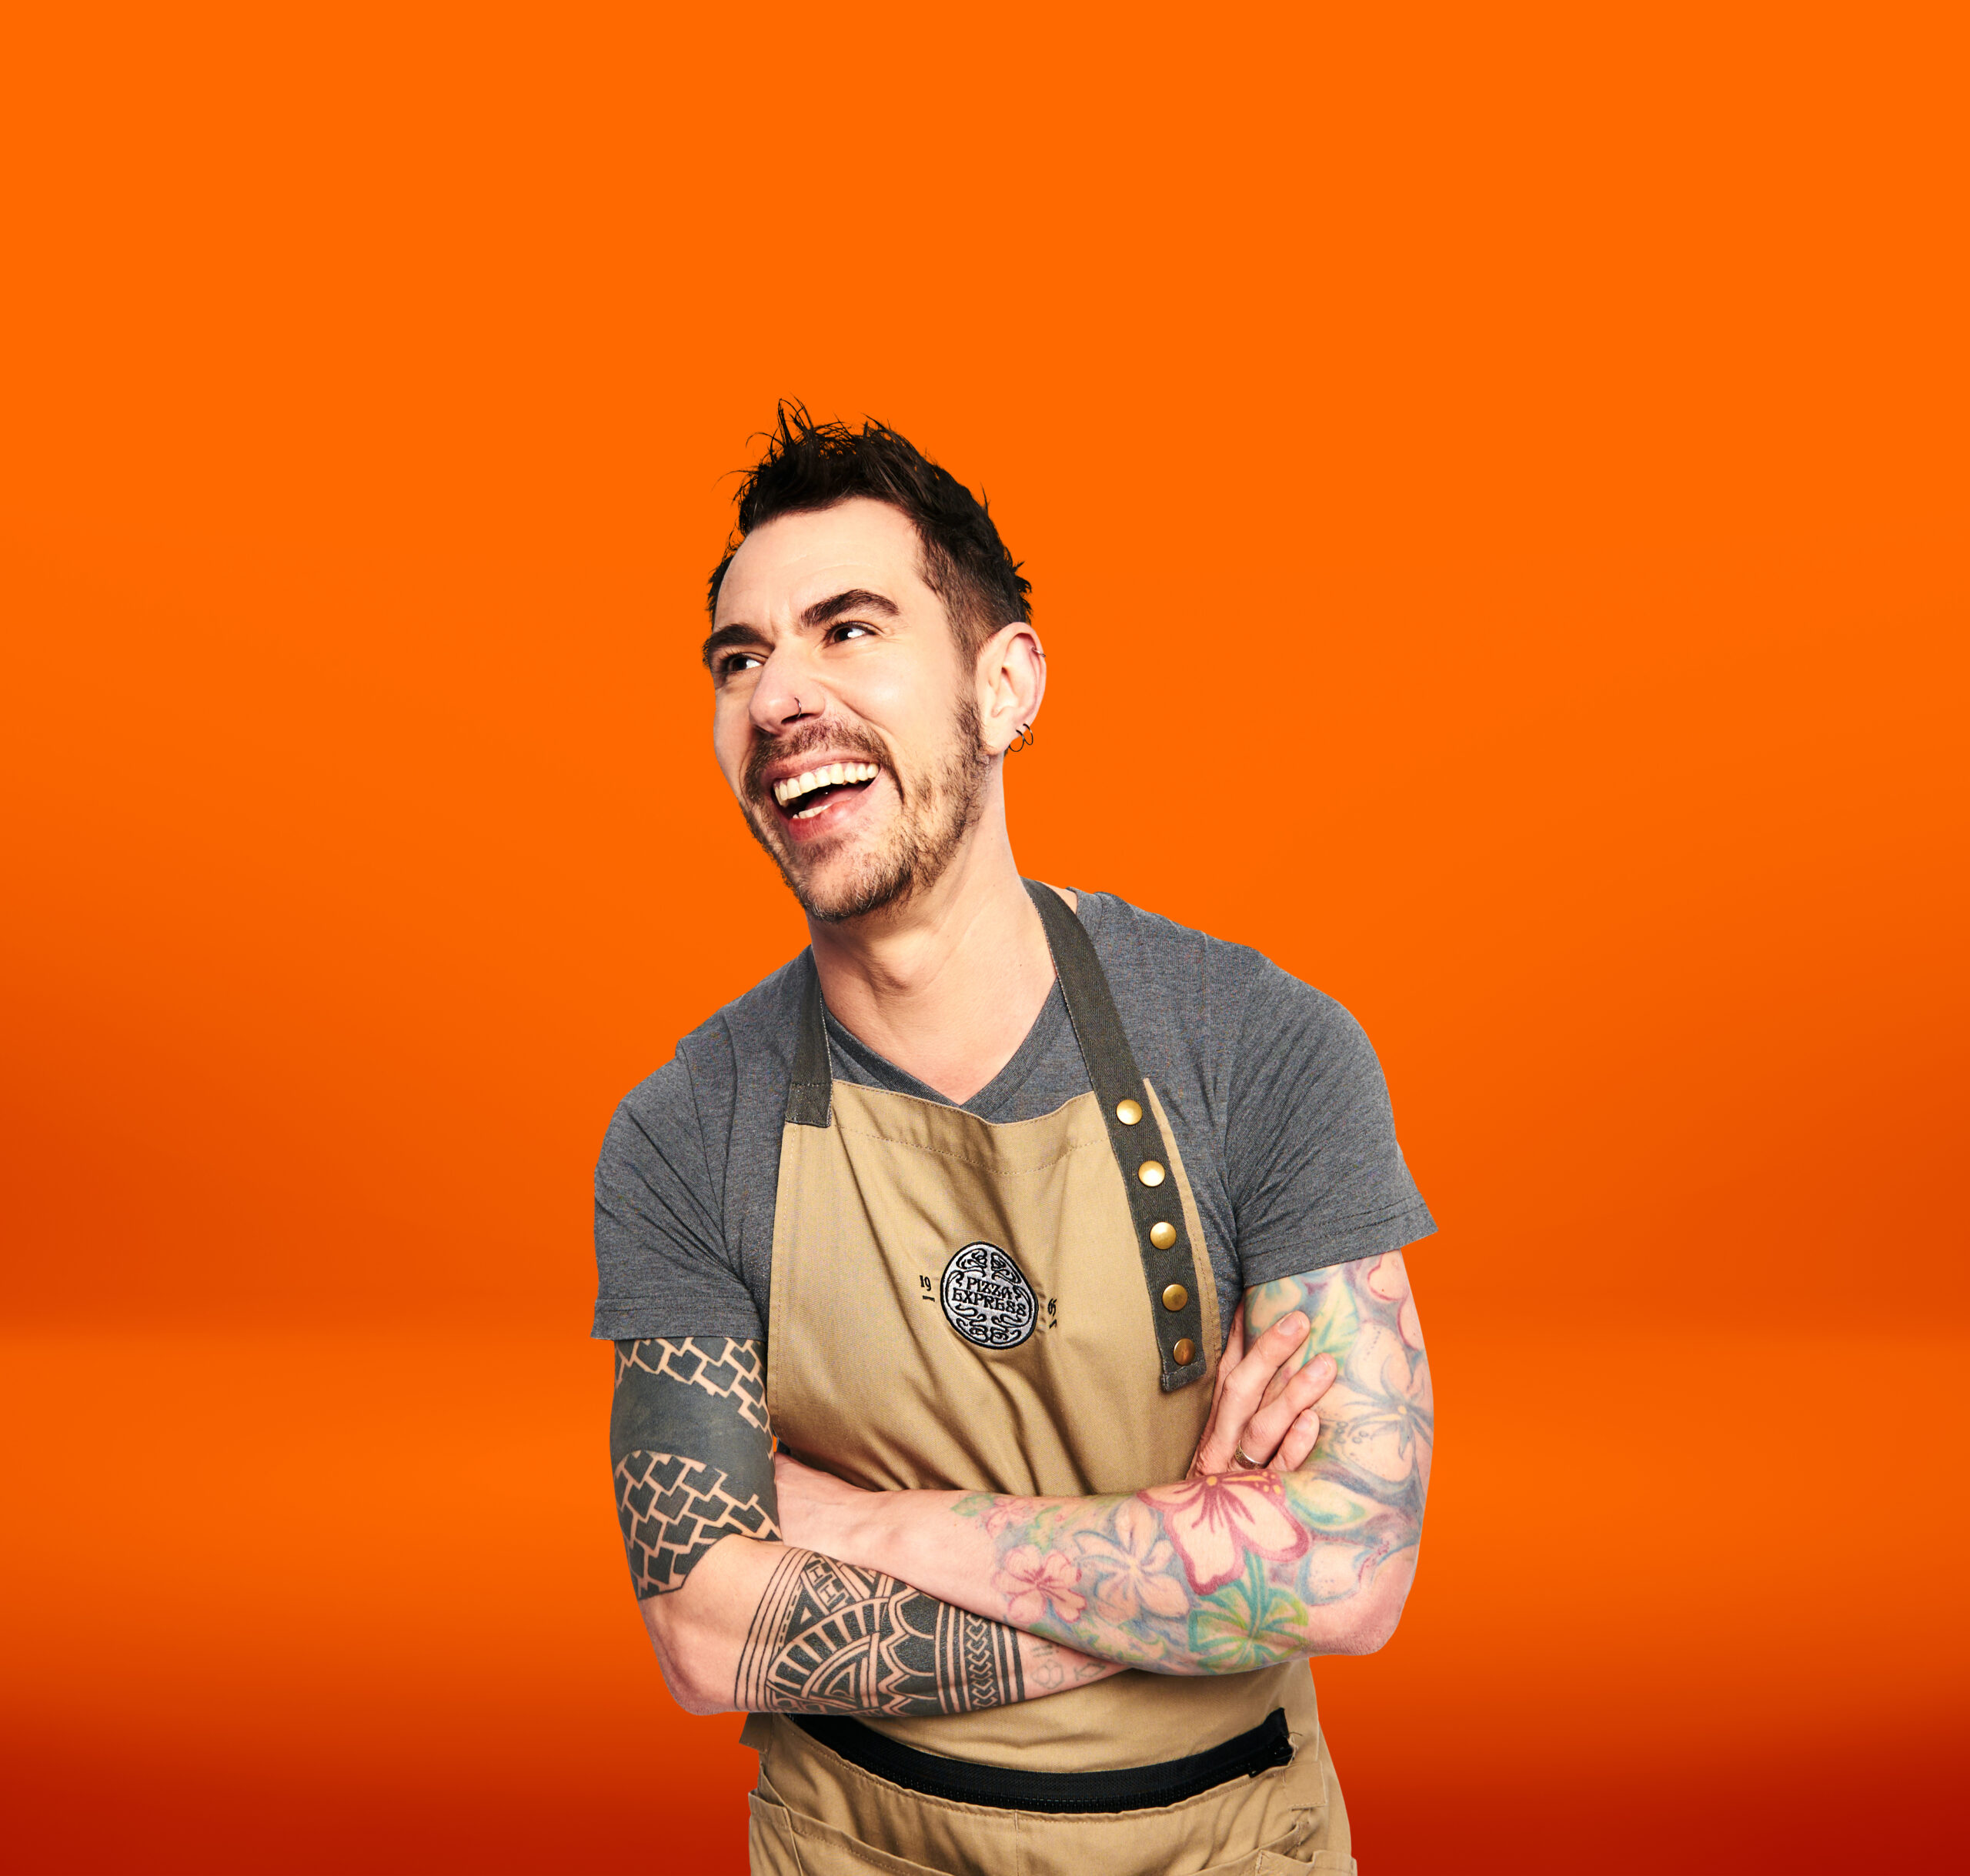 Stephen Santouris from PizzaEpxress grinning widely in front of orange background